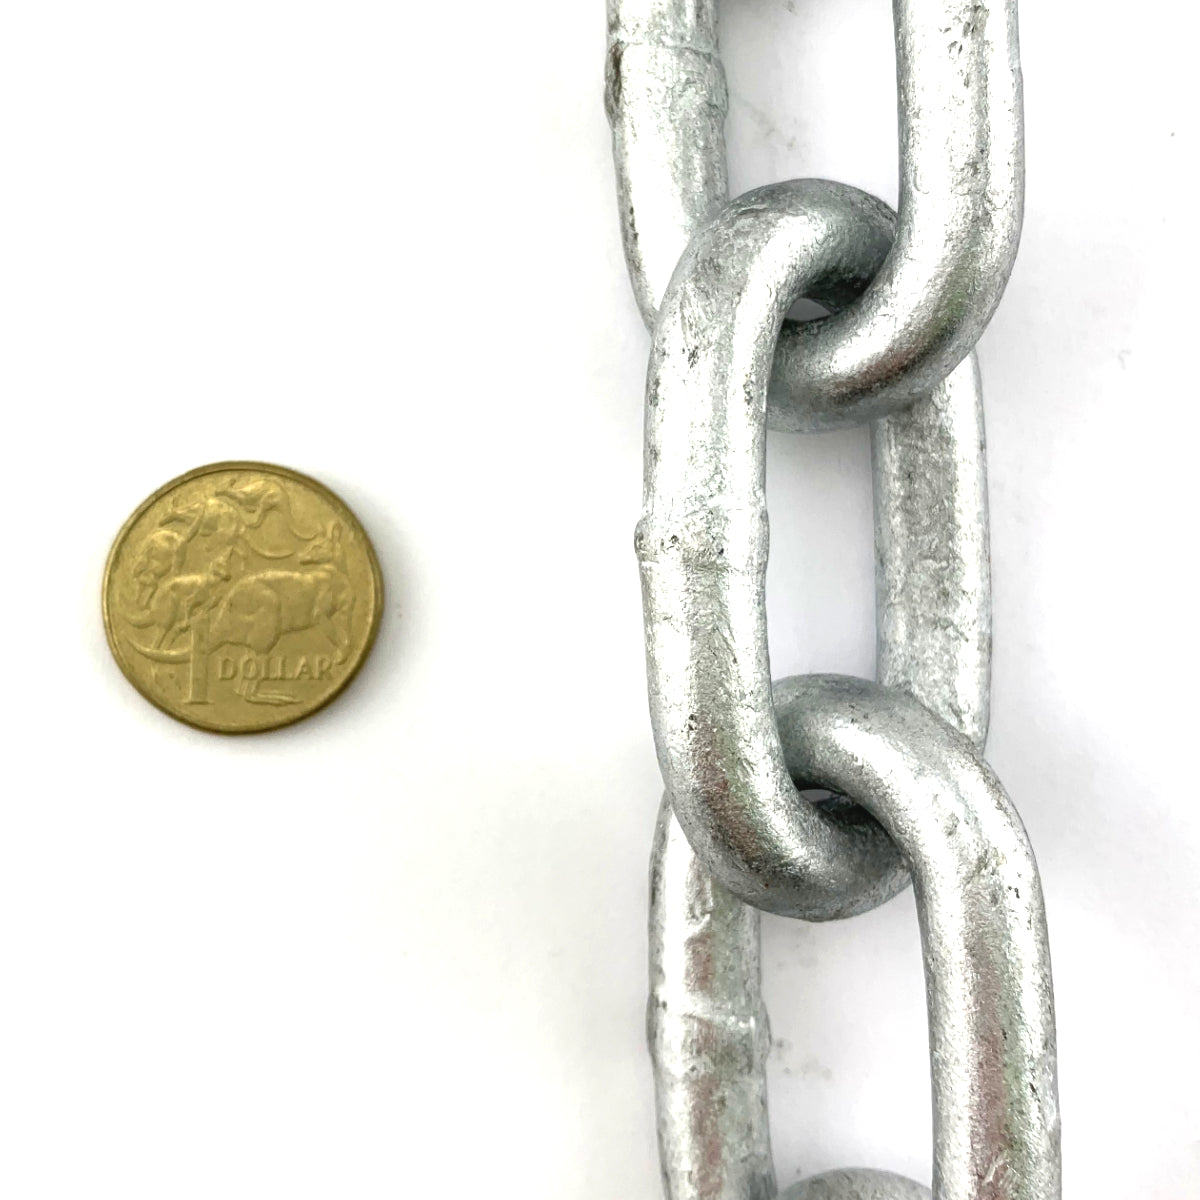 10mm galvanised welded link chain. Order chain by the metre. Melbourne, Australia.